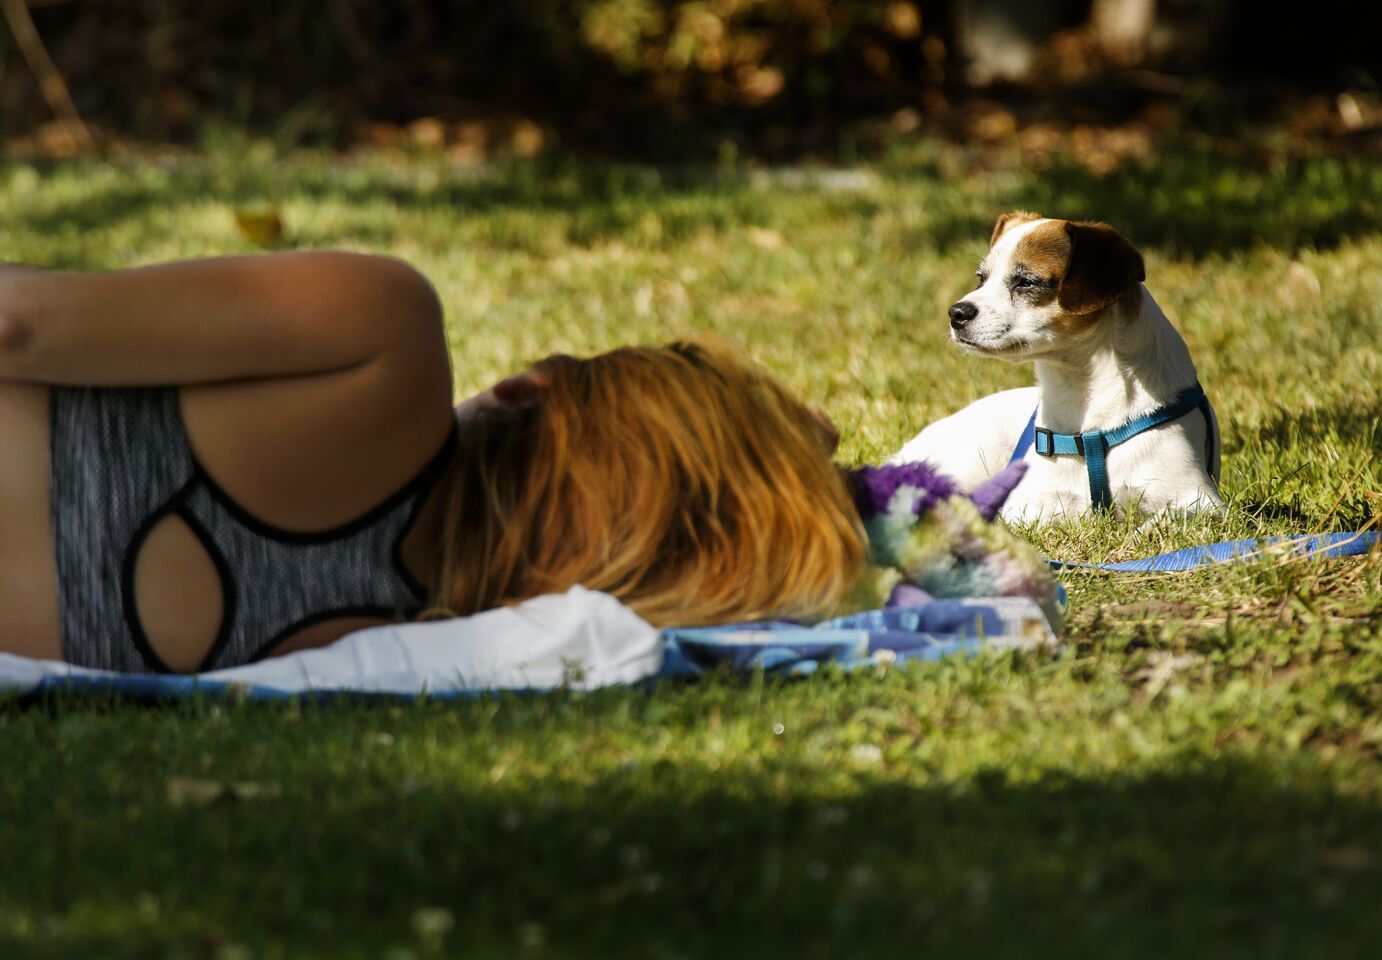 Lincoln watches over pet owner Michelle Virney while she takes a nap to cool off in Vincent Lugo Park in San Gabriel.